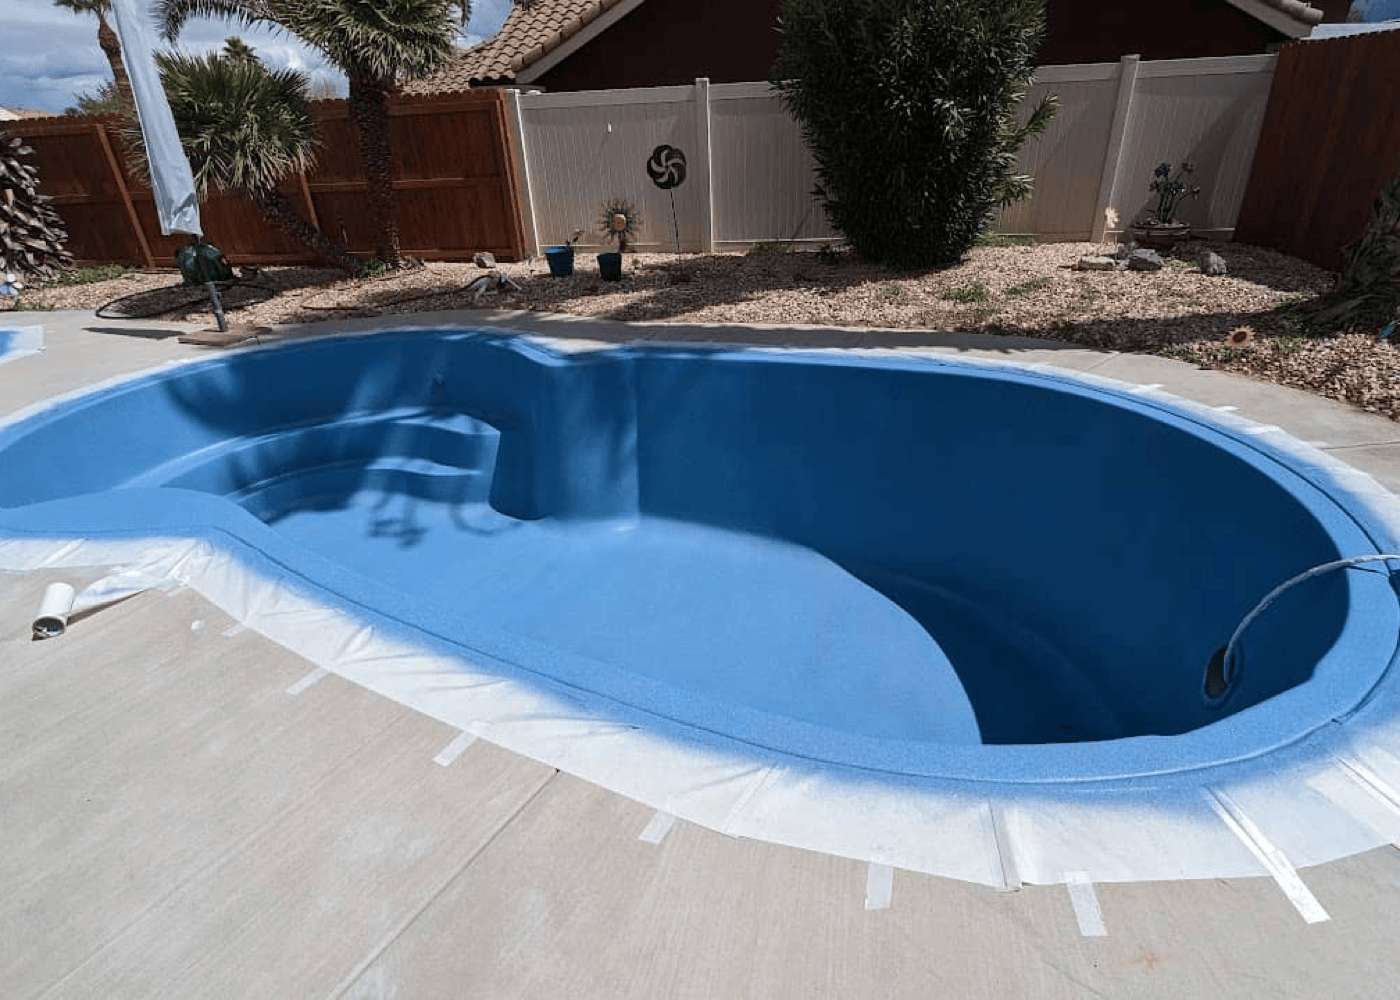 View of an empty in-ground pool, capturing the entire length of the pool.